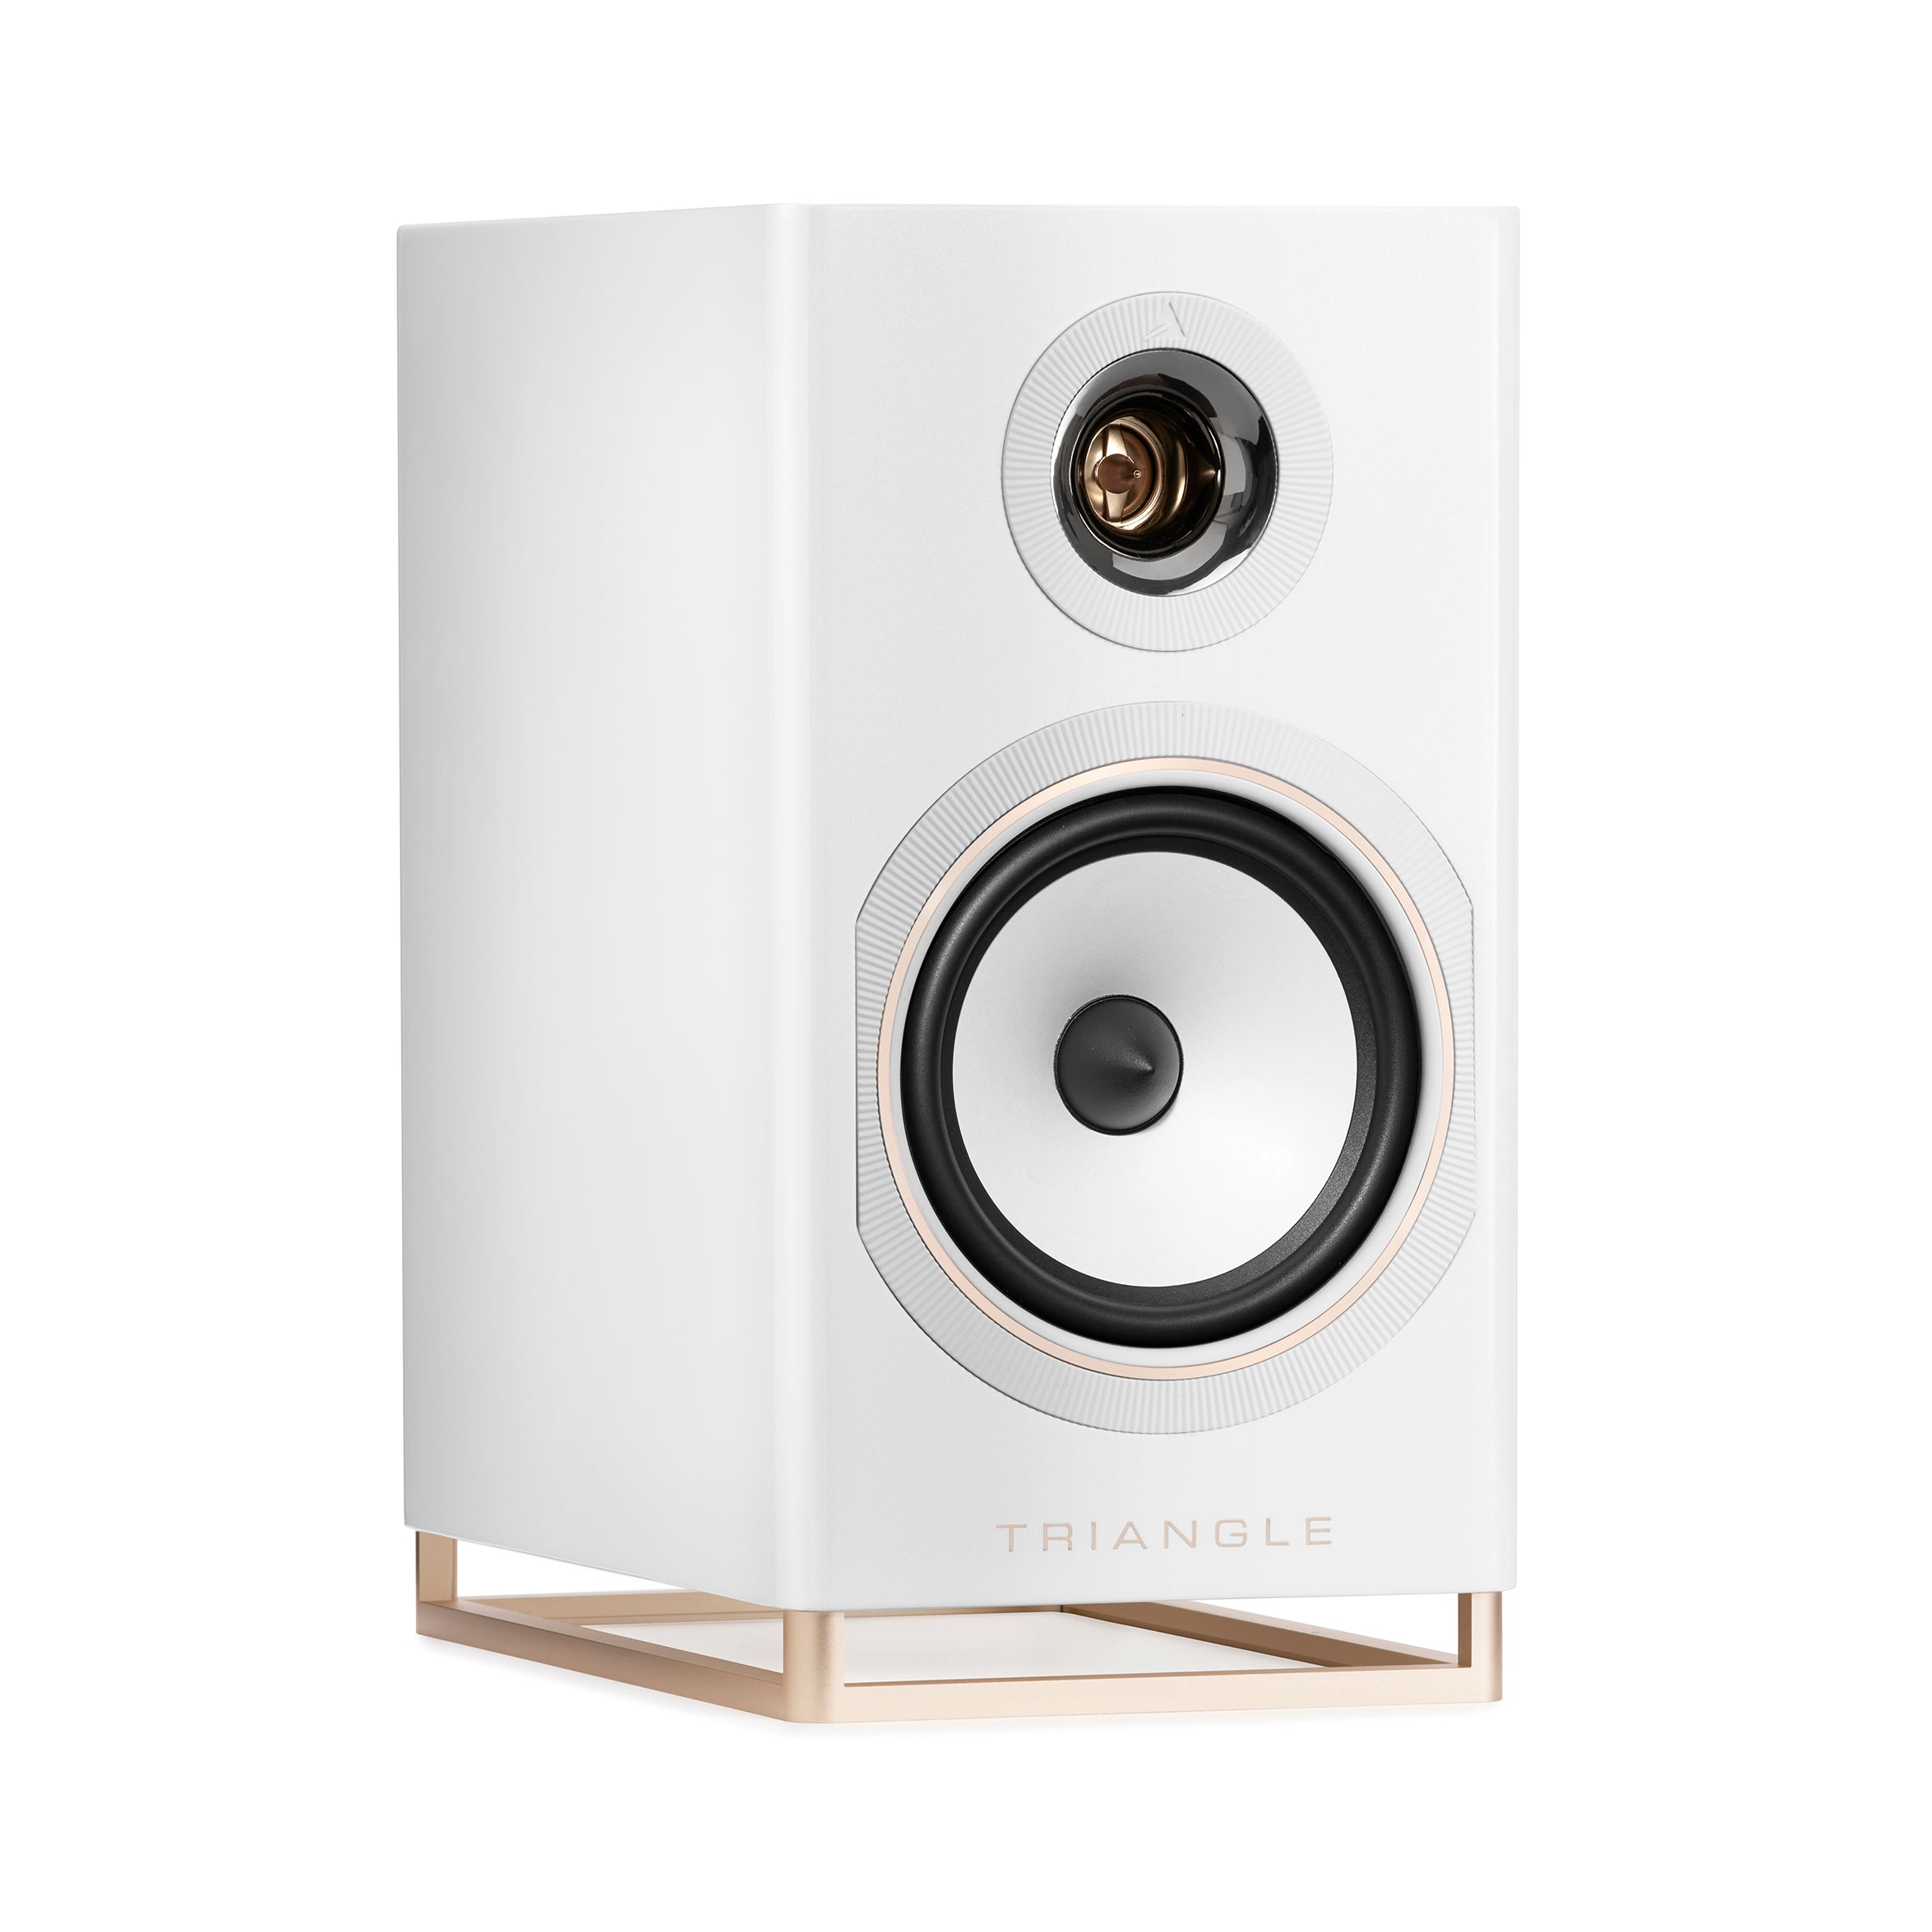 triangle-capella-enceinte-active-wifi-bluetooth-haut-de-gamme-stereo-hub-wisa-streaming-musique-pictures-packshot-blanc-sideral-space-white-4